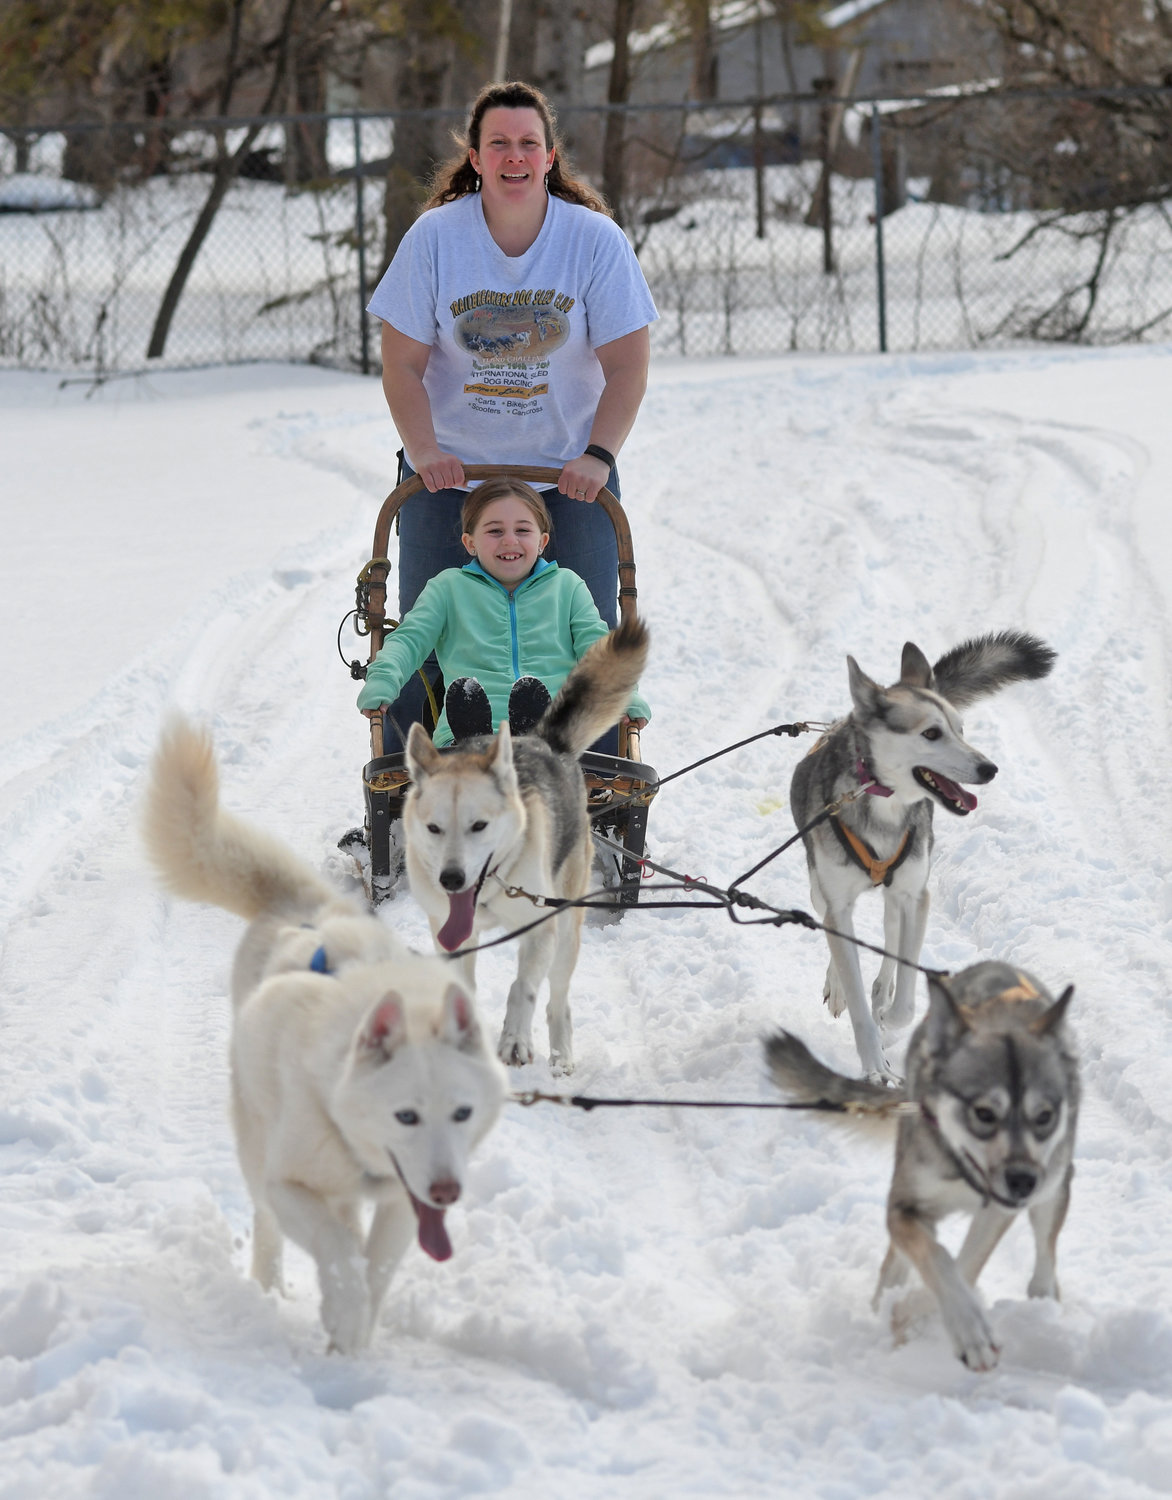 MUSH! — Enjoying a ride on a dog sled Wednesday afternoon near the Western Town Library in Westernville is Molly Southwick, 7, daughter of Matt and Rachel Southwick of Western. At the controls is Christina Gates of Remsen, who visited the library as part of a program that included an information session on sled dogs and their training. The library said the program also included a live demonstration outside, with children getting a chance to take a short ride on the sled.